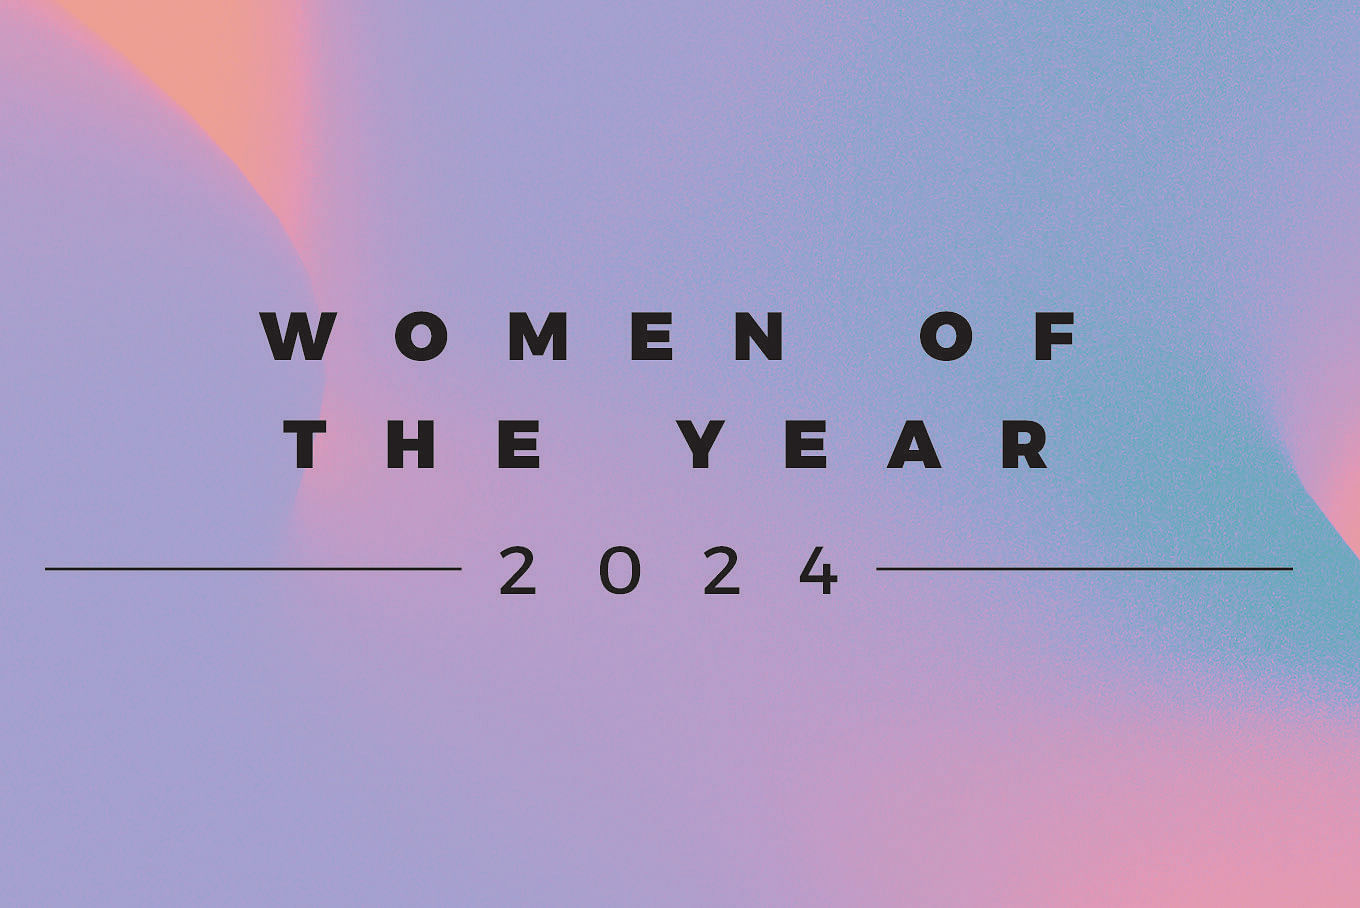 Women of the Year 2024: Nominate extraordinary women now